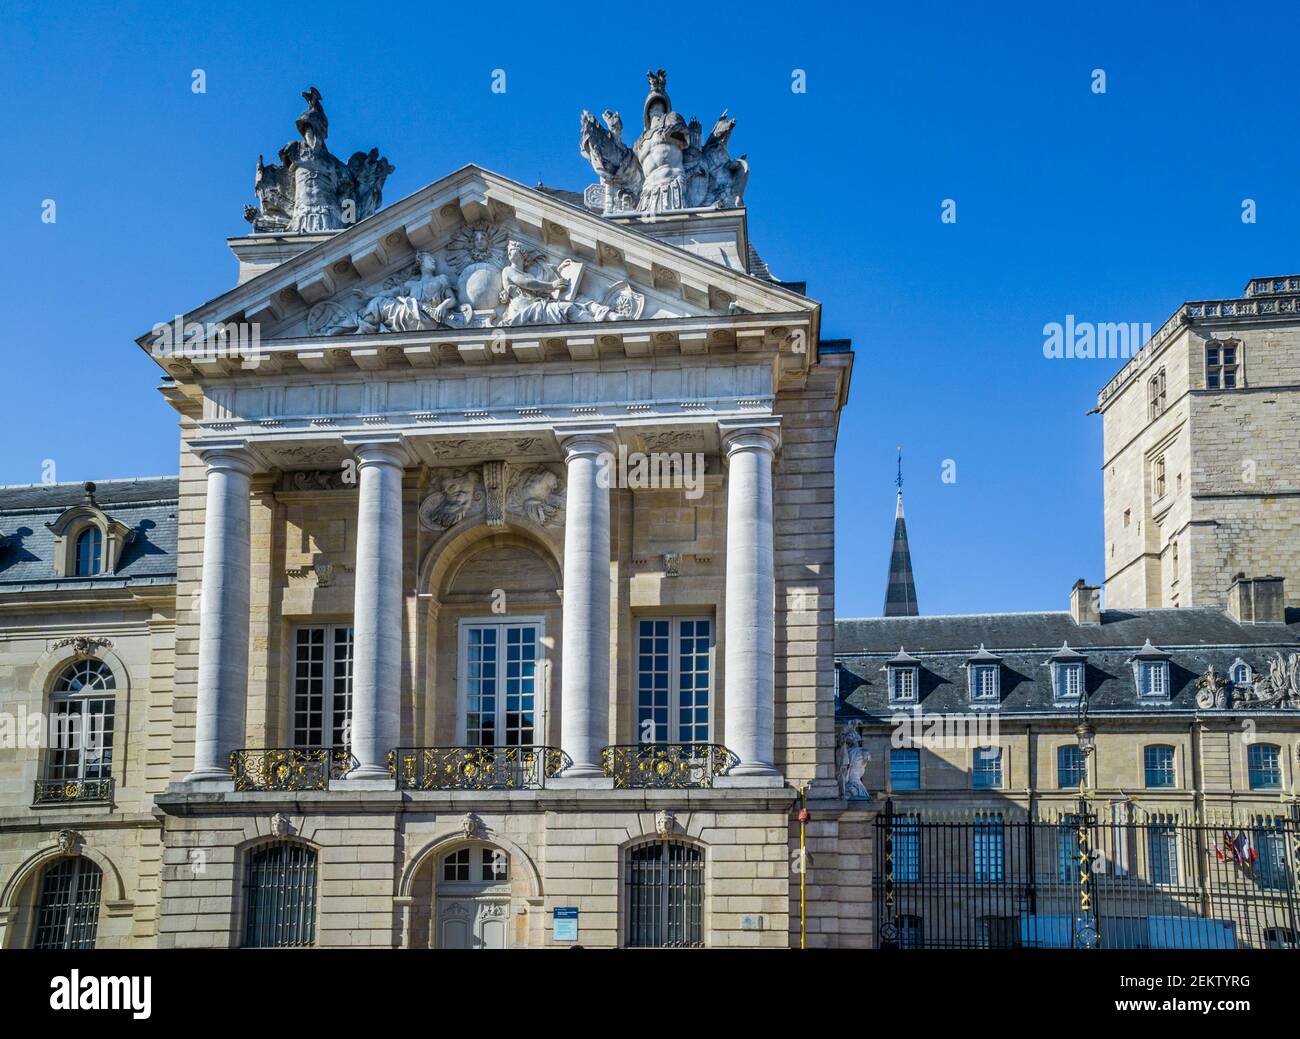 east portal of the Palace of the Dukes and Estates of Burgundy at Place de la Libération in Dijon, Burgundy, with Tour Philippe le Bon towerin the bac Stock Photo